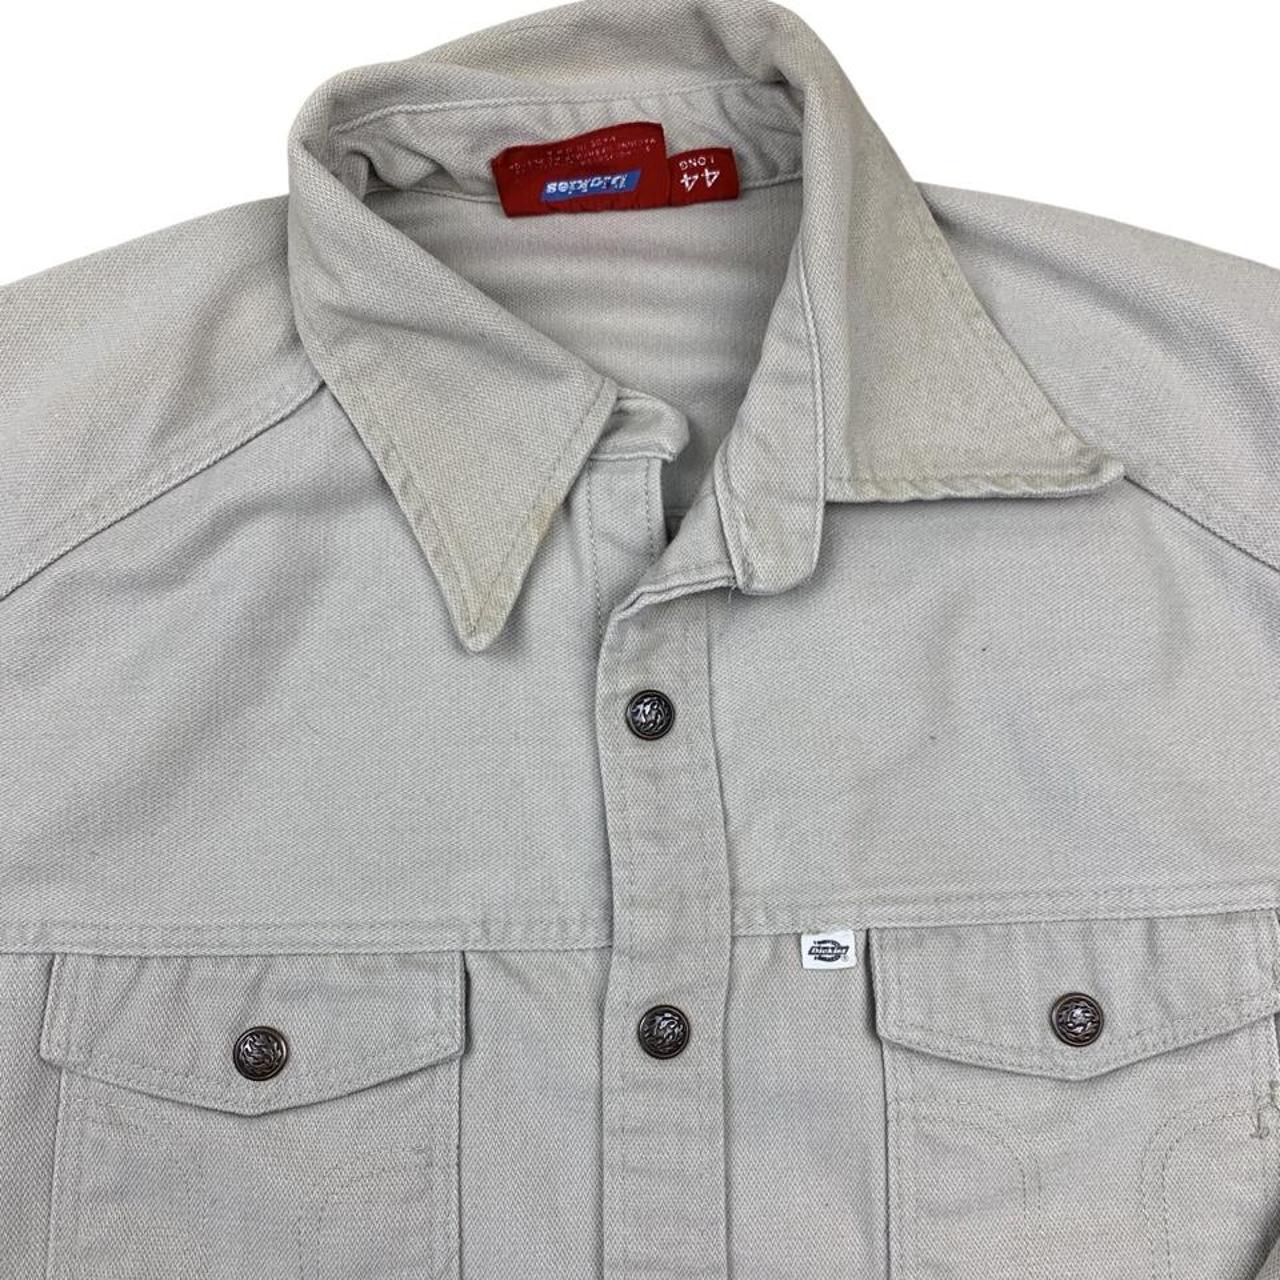 Vintage Dickies Button Up Thick Cotton Work Shirt... - Depop